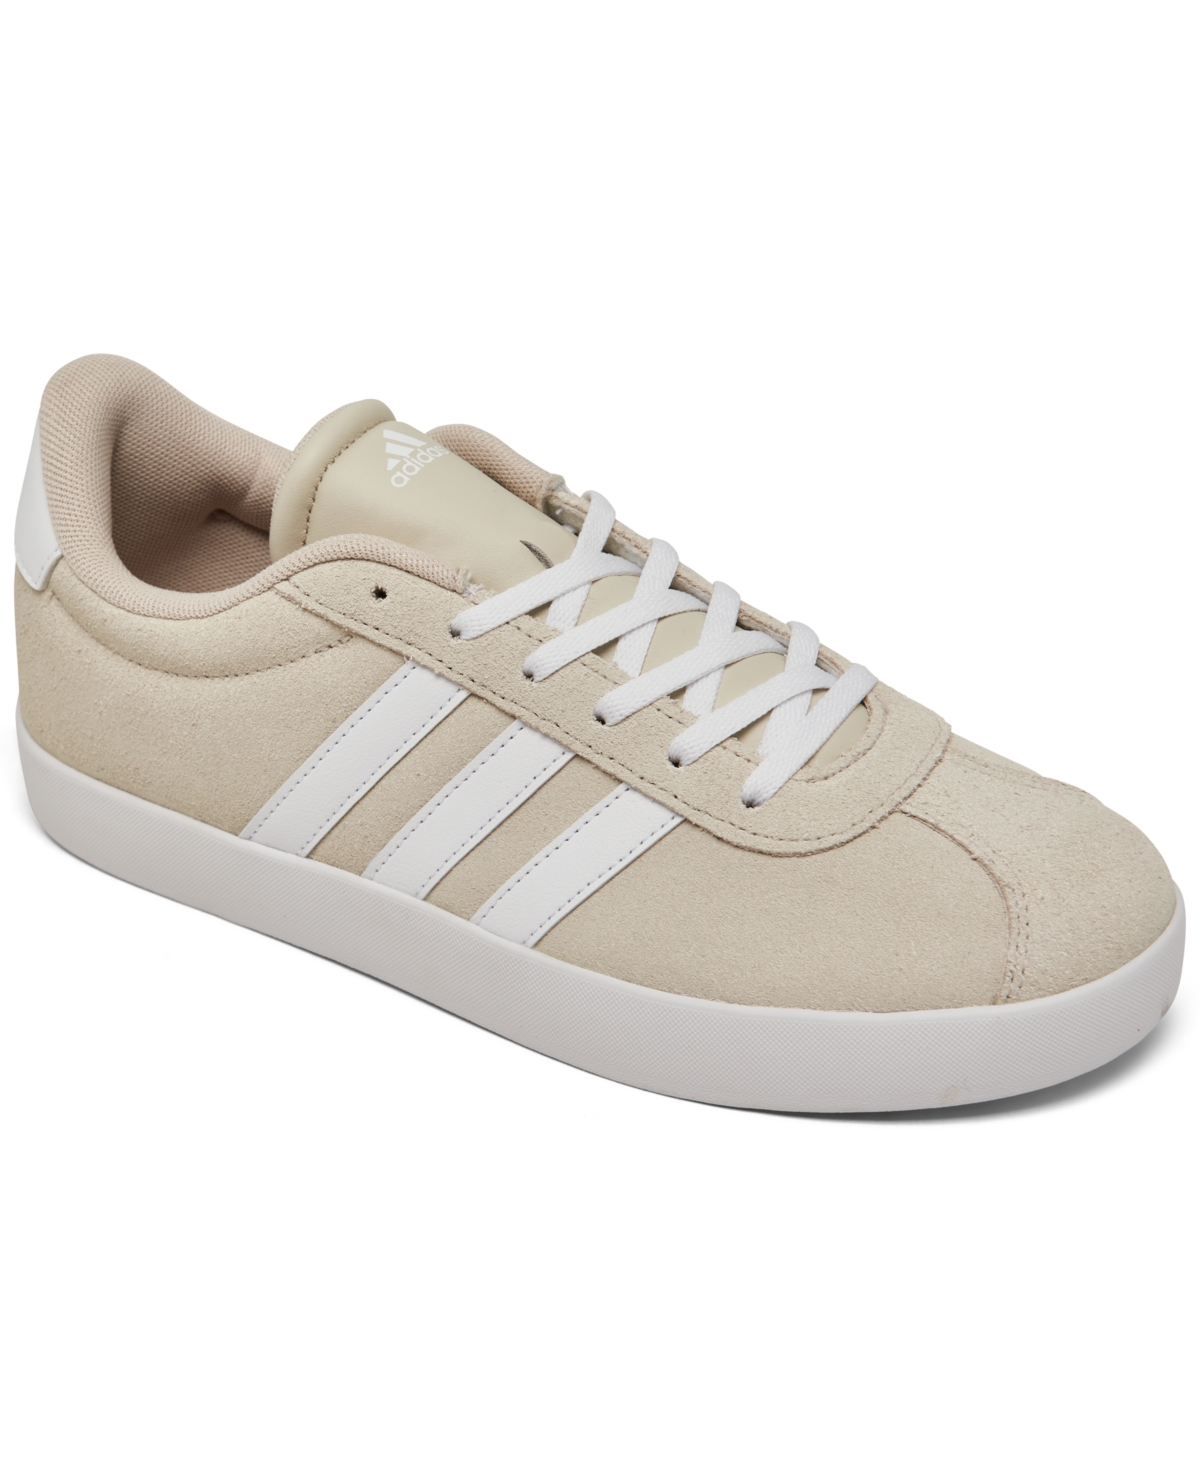 Shop Adidas Originals Big Kids Vl Court 3.0 Casual Sneakers From Finish Line In Aluminum,cloud White